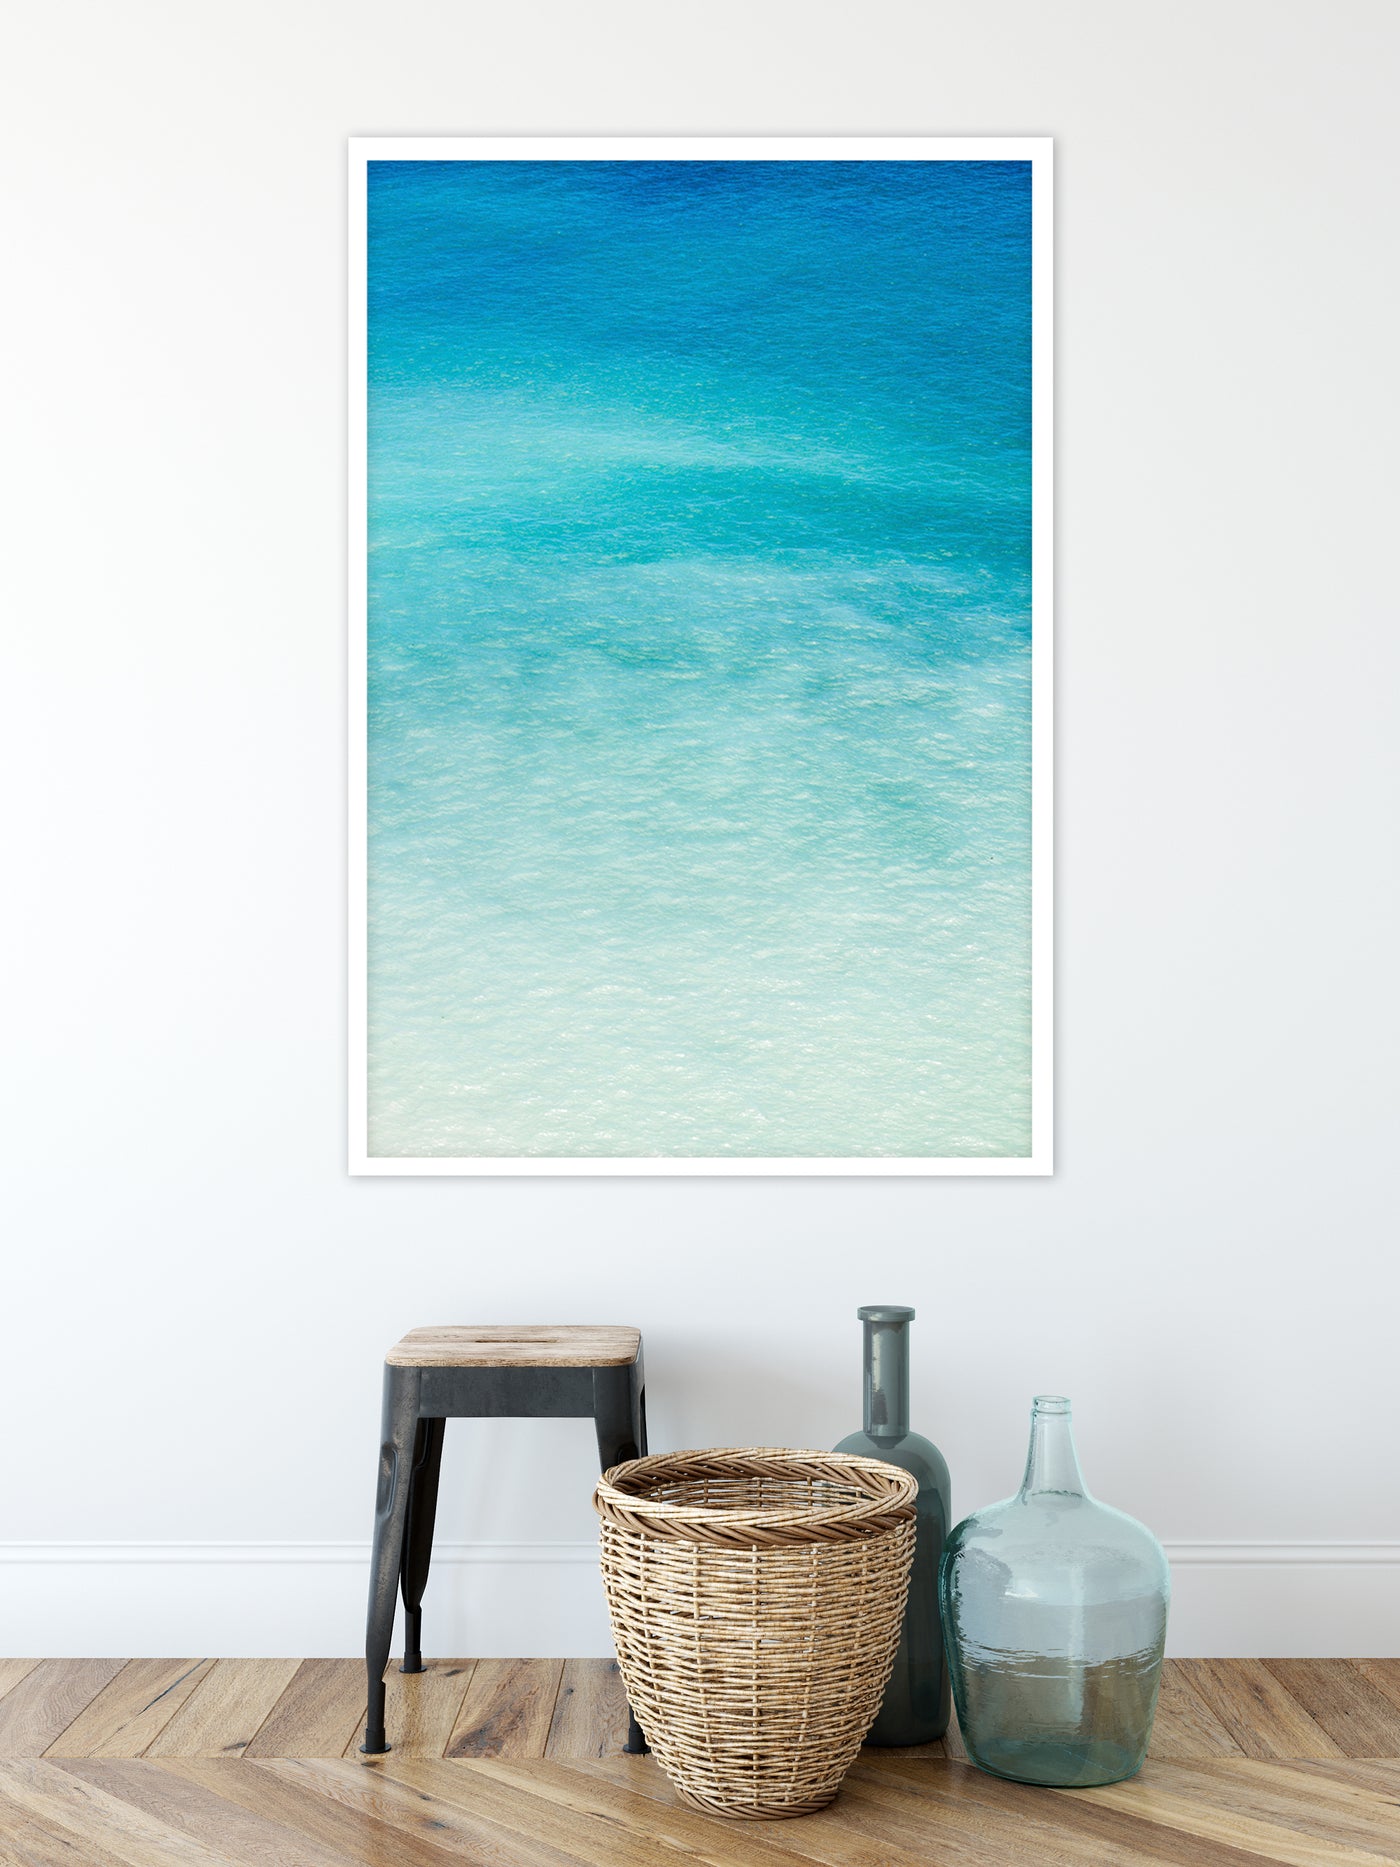 Magoito - Large turquoise ocean fine art print by Cattie Coyle Photography